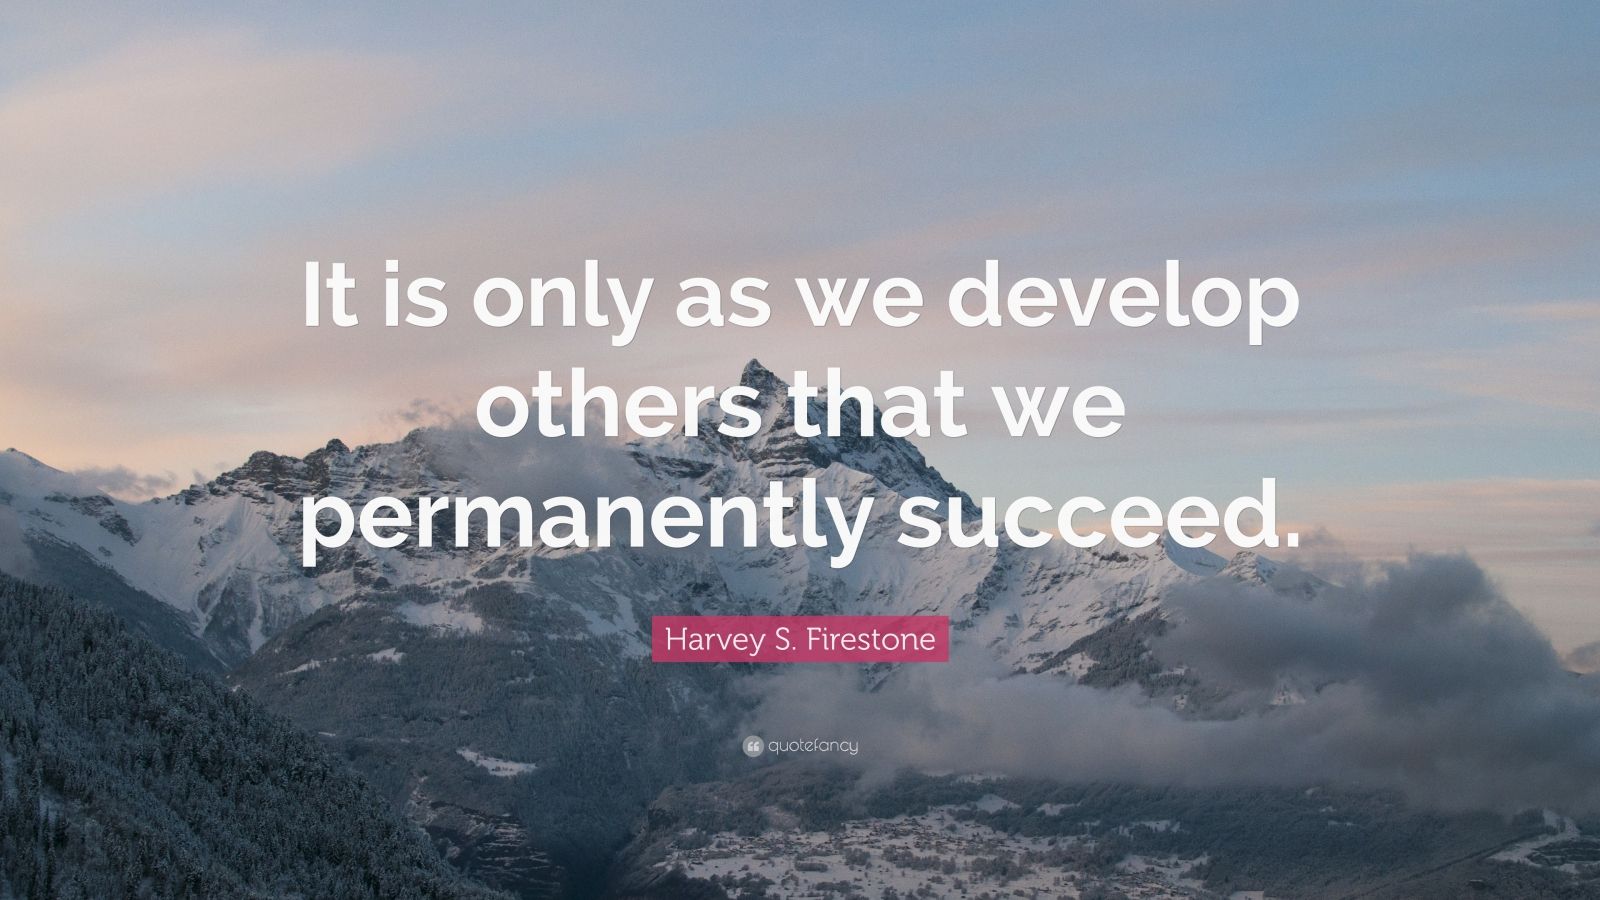 Harvey S. Firestone Quote: “It is only as we develop others that we ...